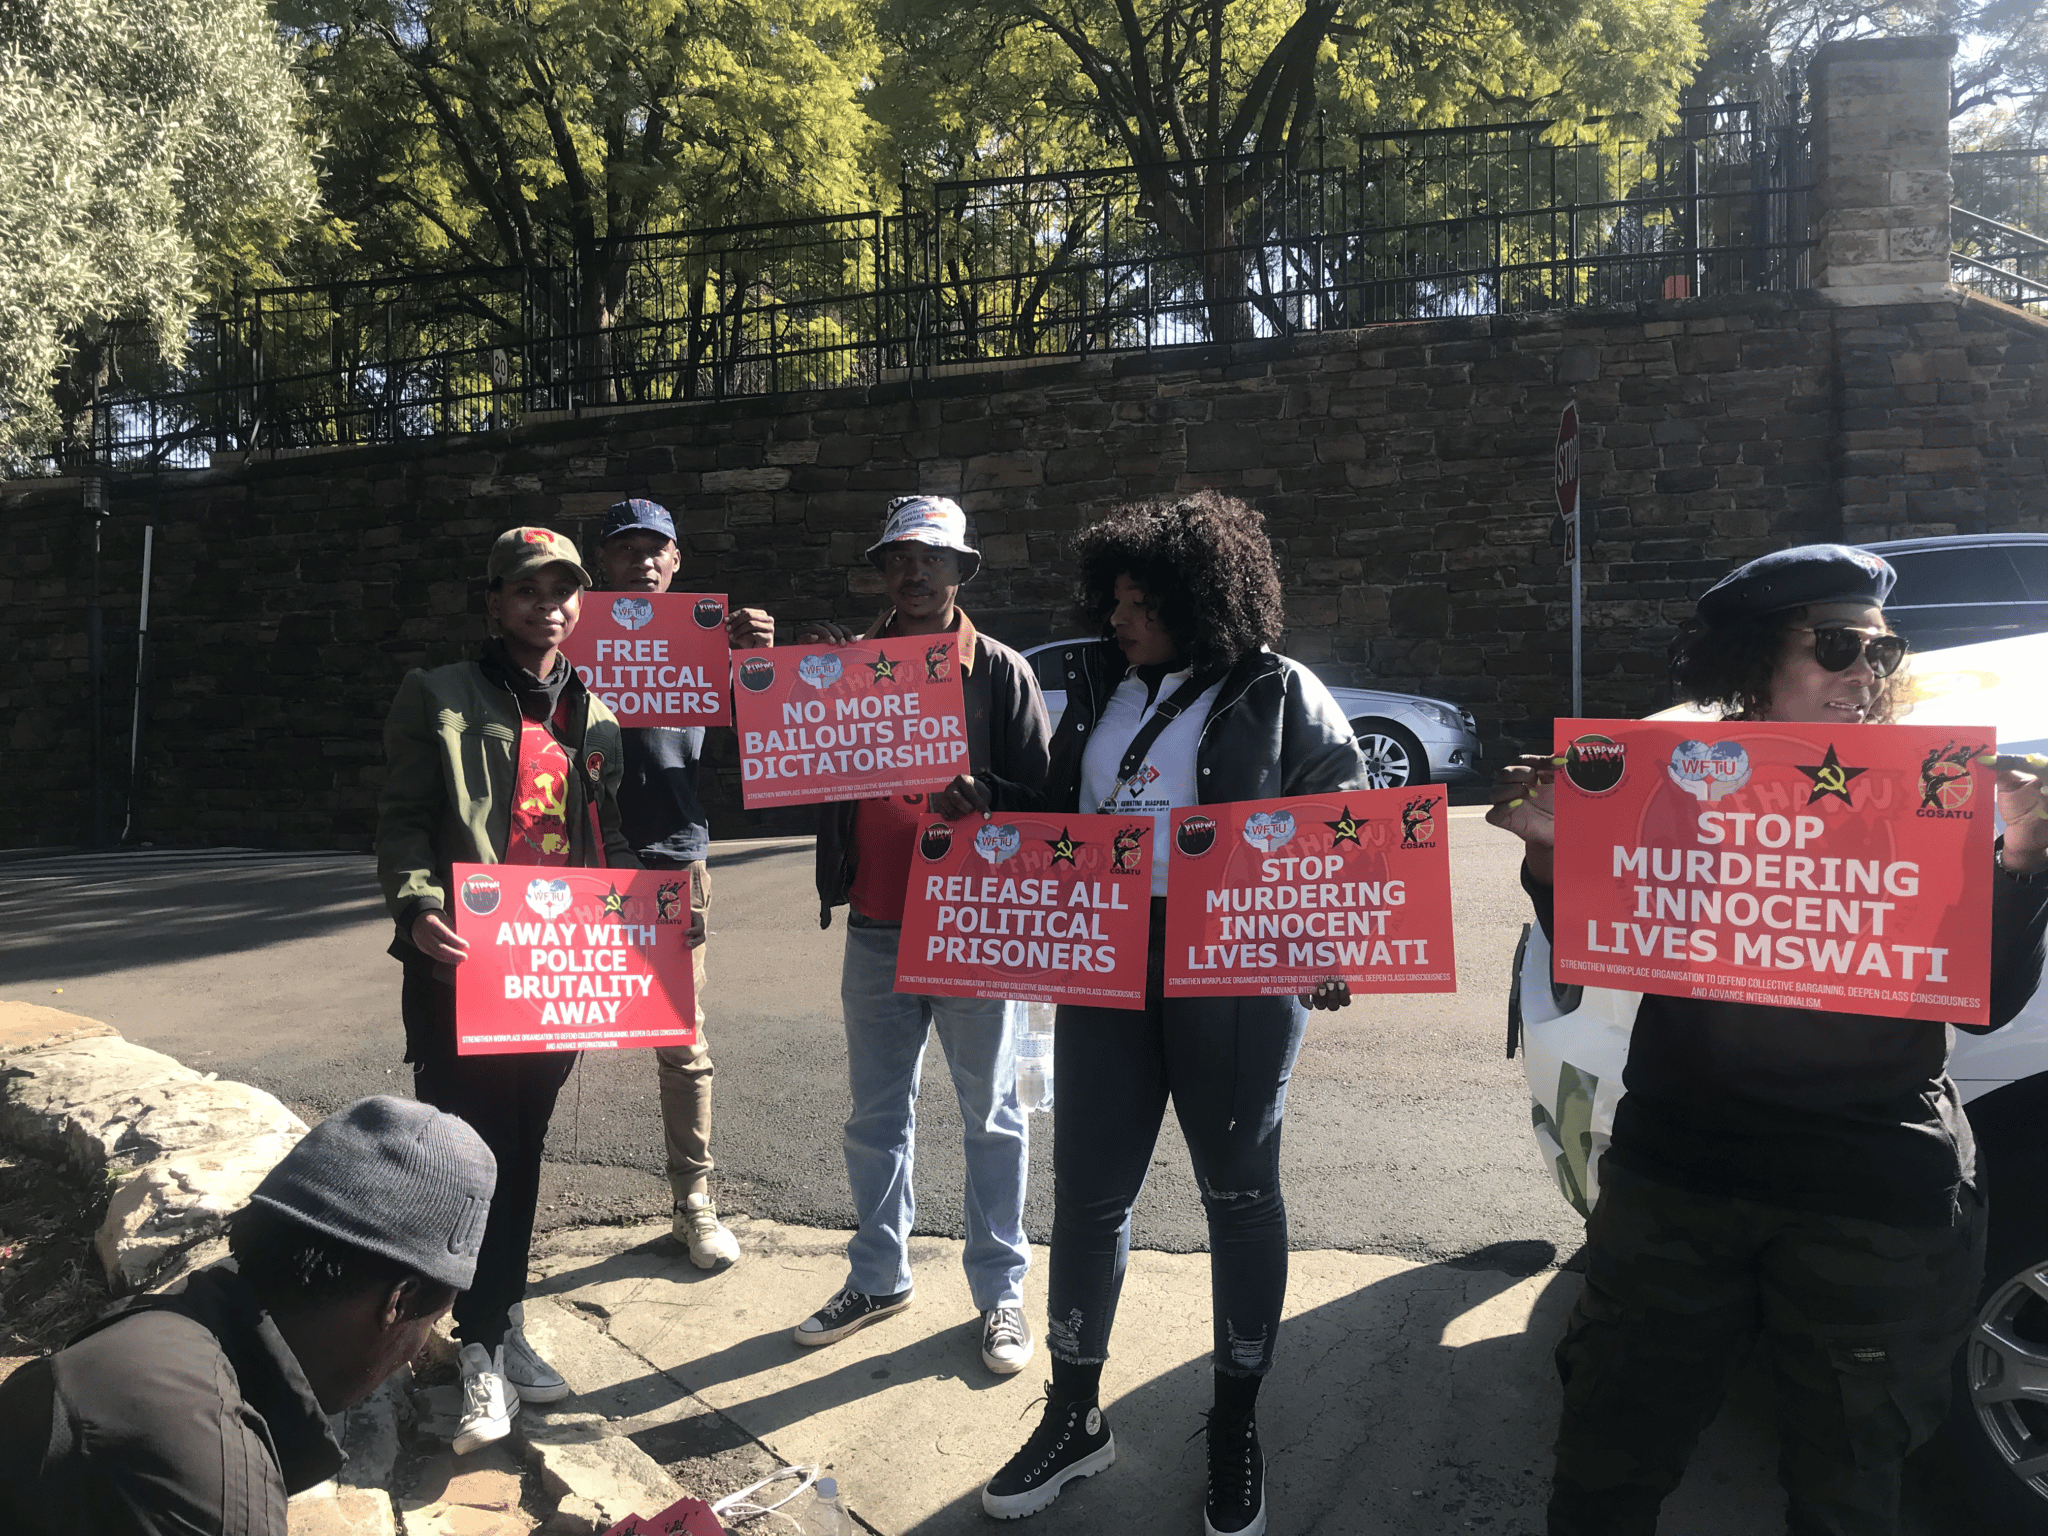 Protest at the High Commission, June 30, 2022